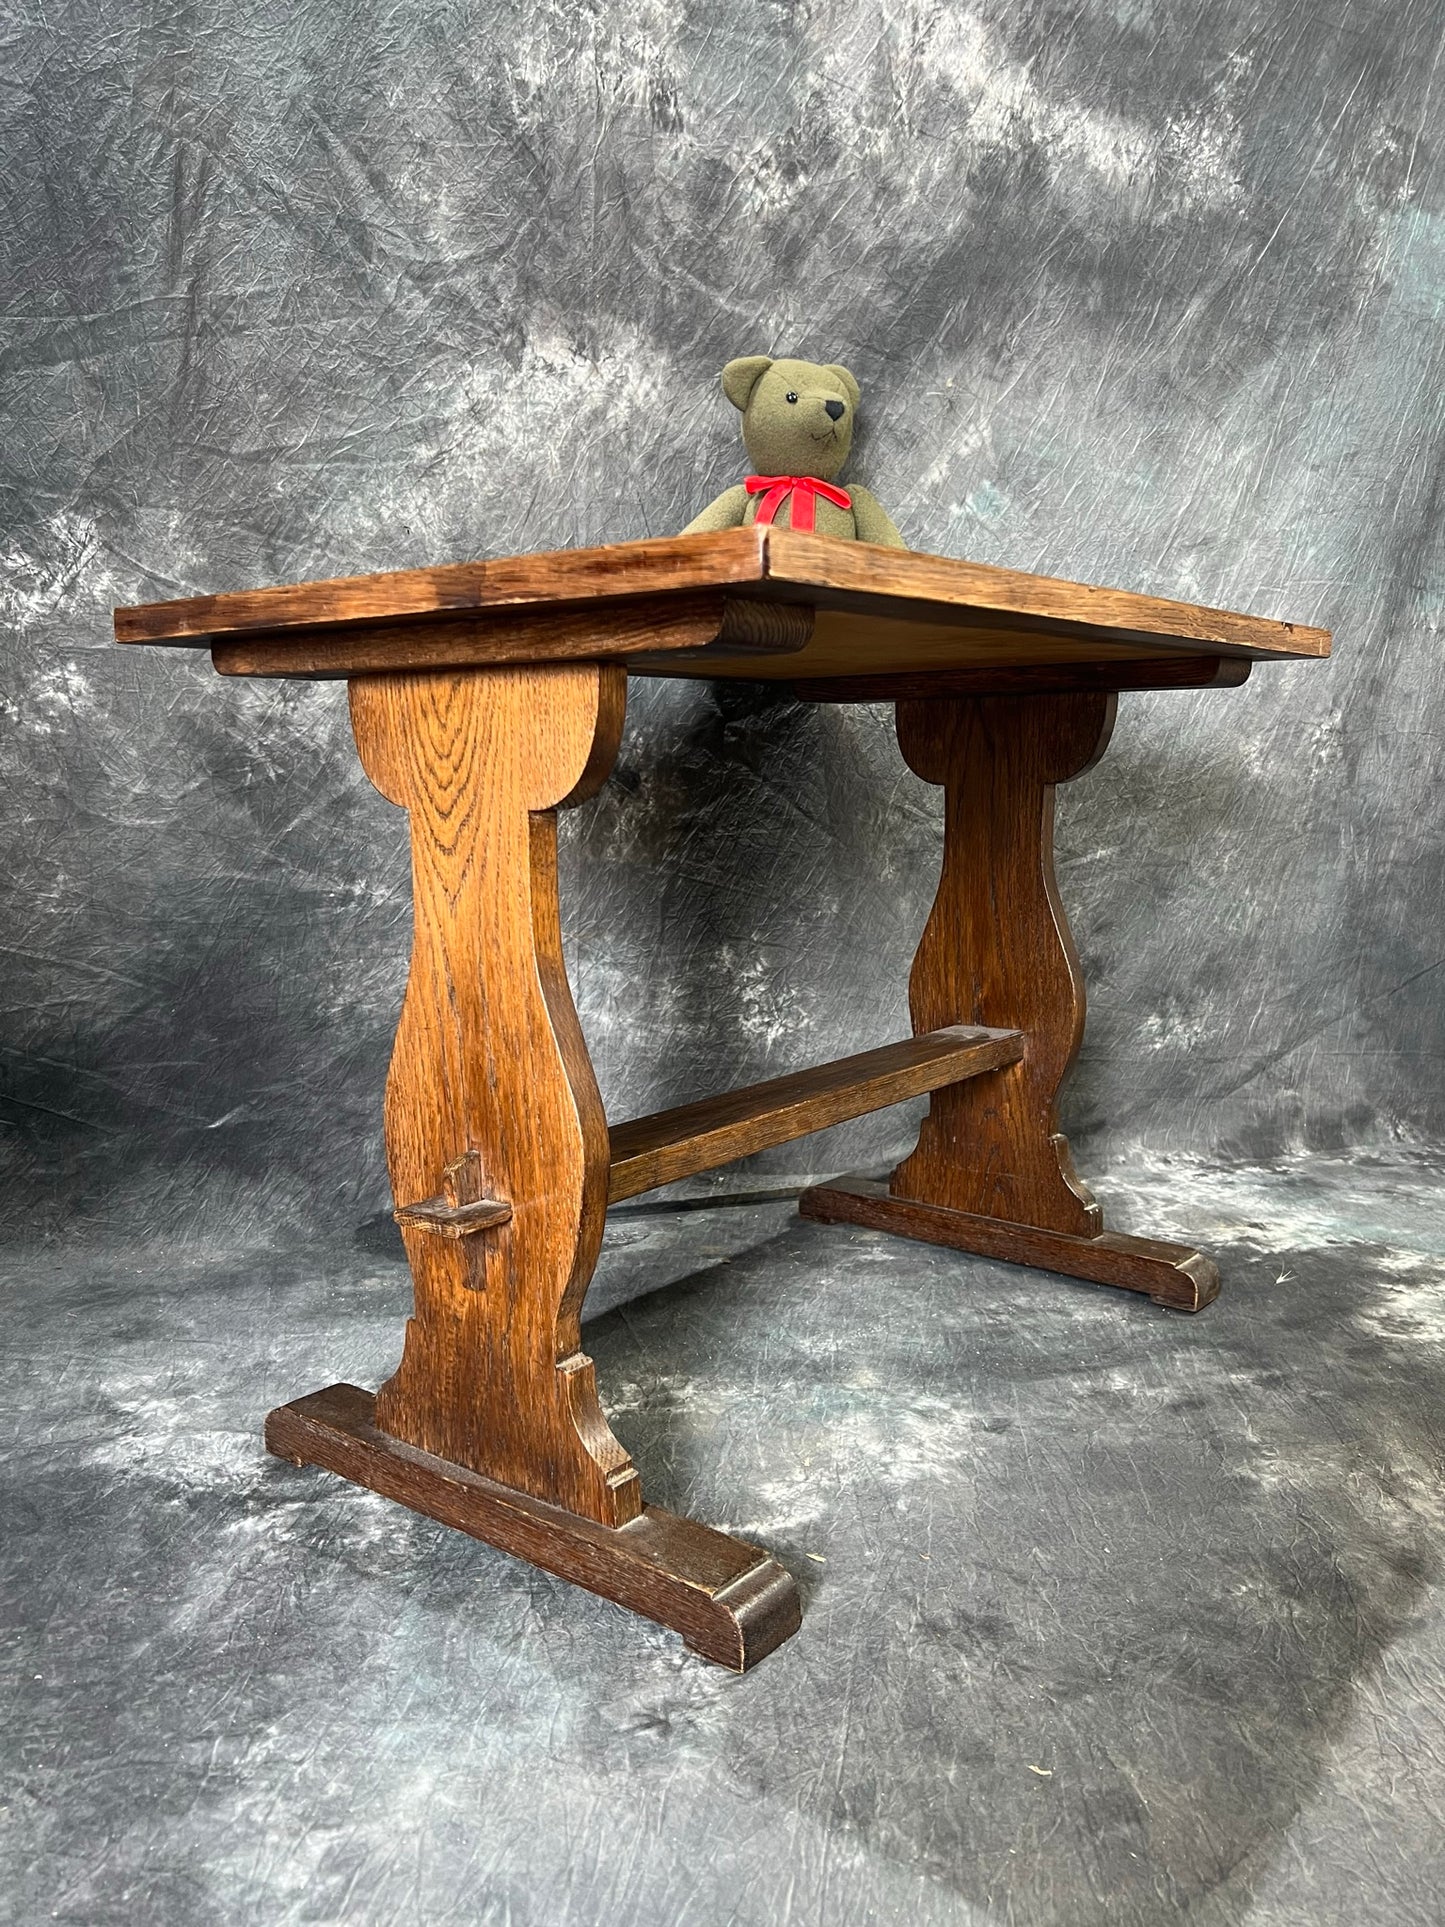 Vintage Oak Refectory Coffee Table Rustic Farmhouse Antique Country Home Side Table